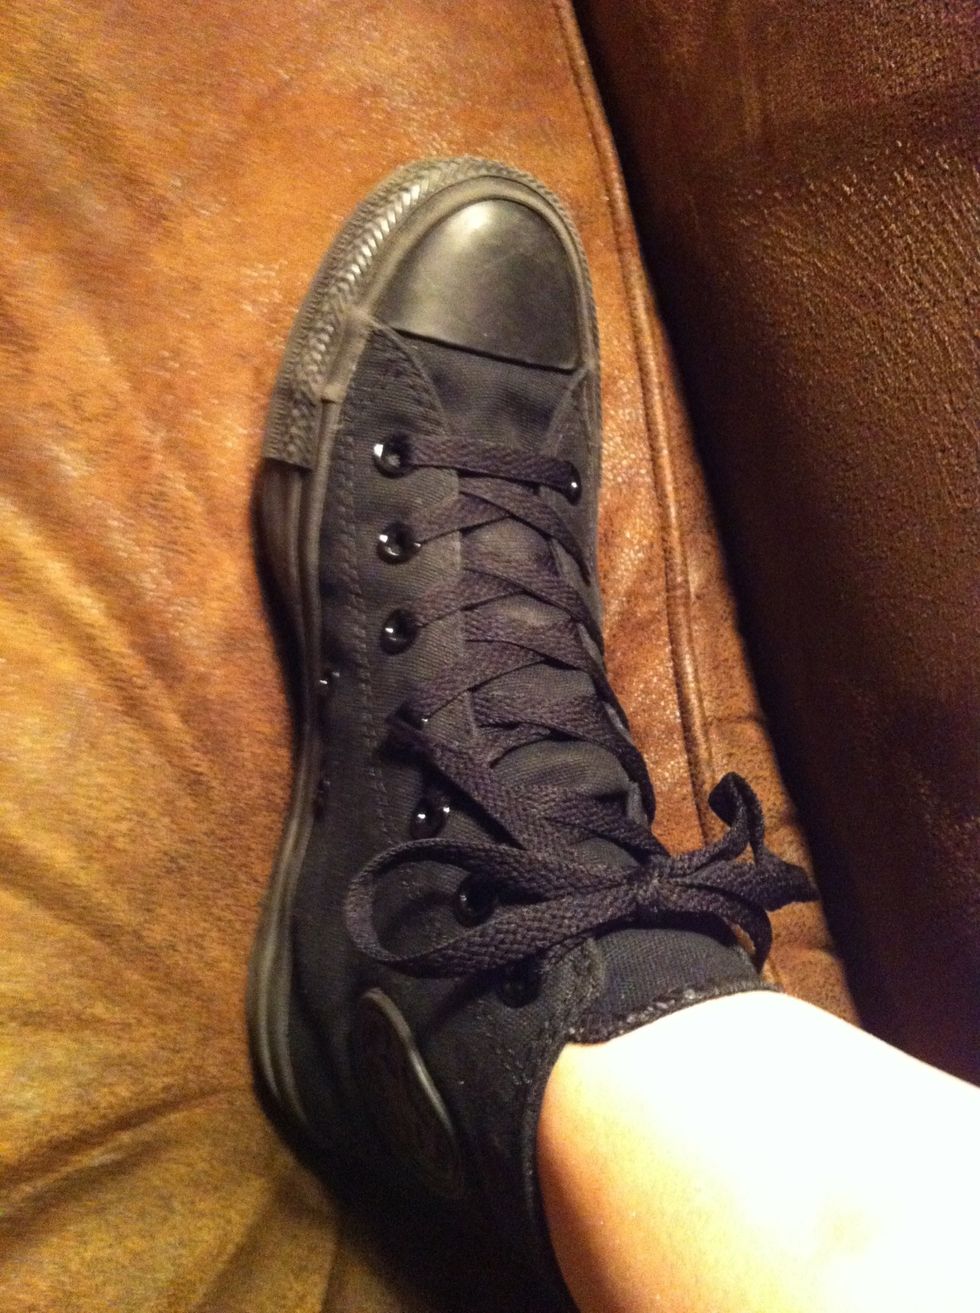 How to tie converse hightops - B+C Guides